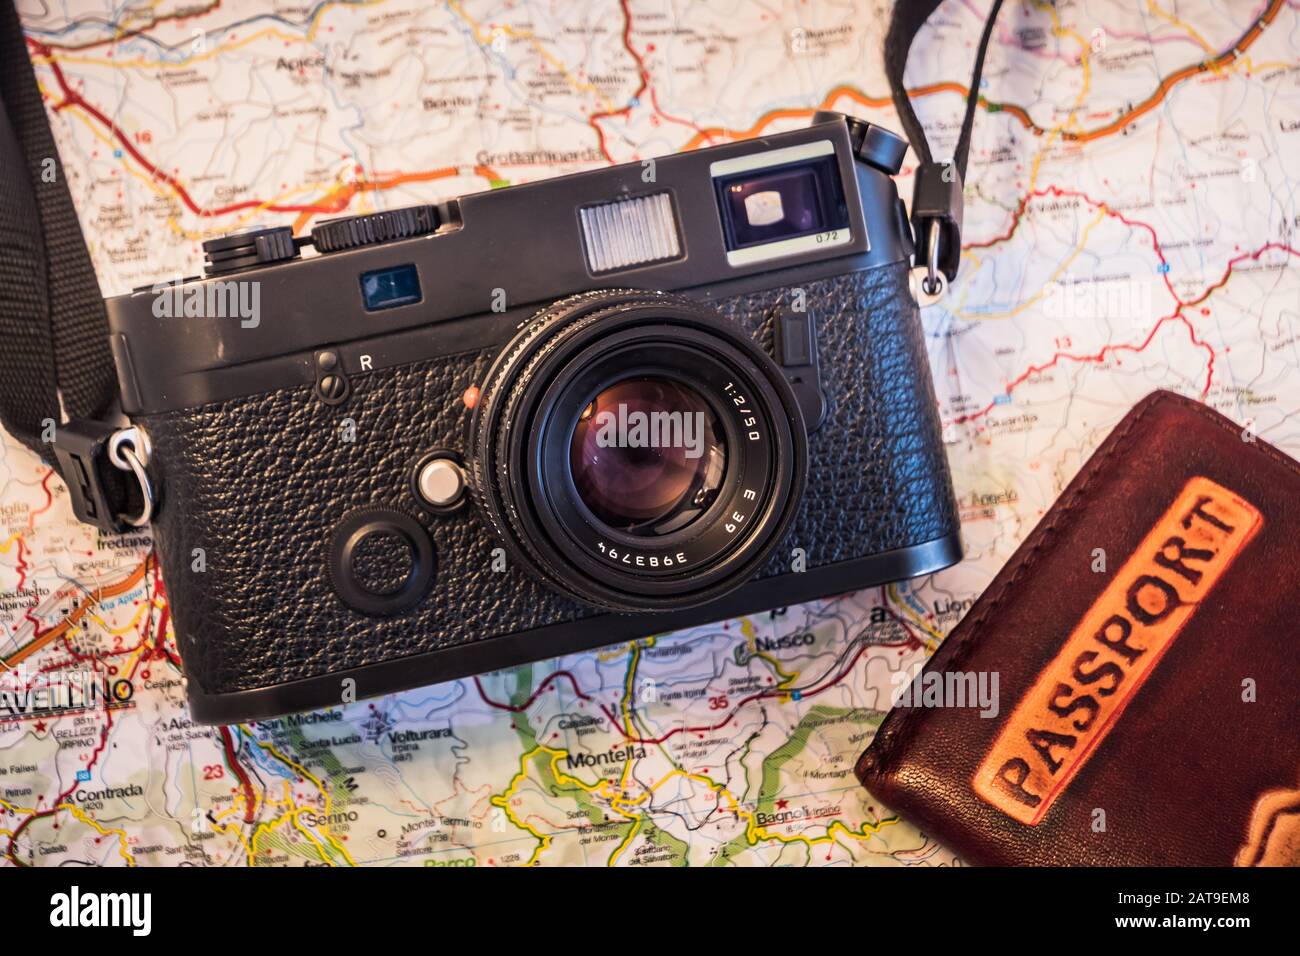 Travel Photography Concept - Photo Camera, Passport and Map on a Dark Wood Background - Vintage Look Stock Photo